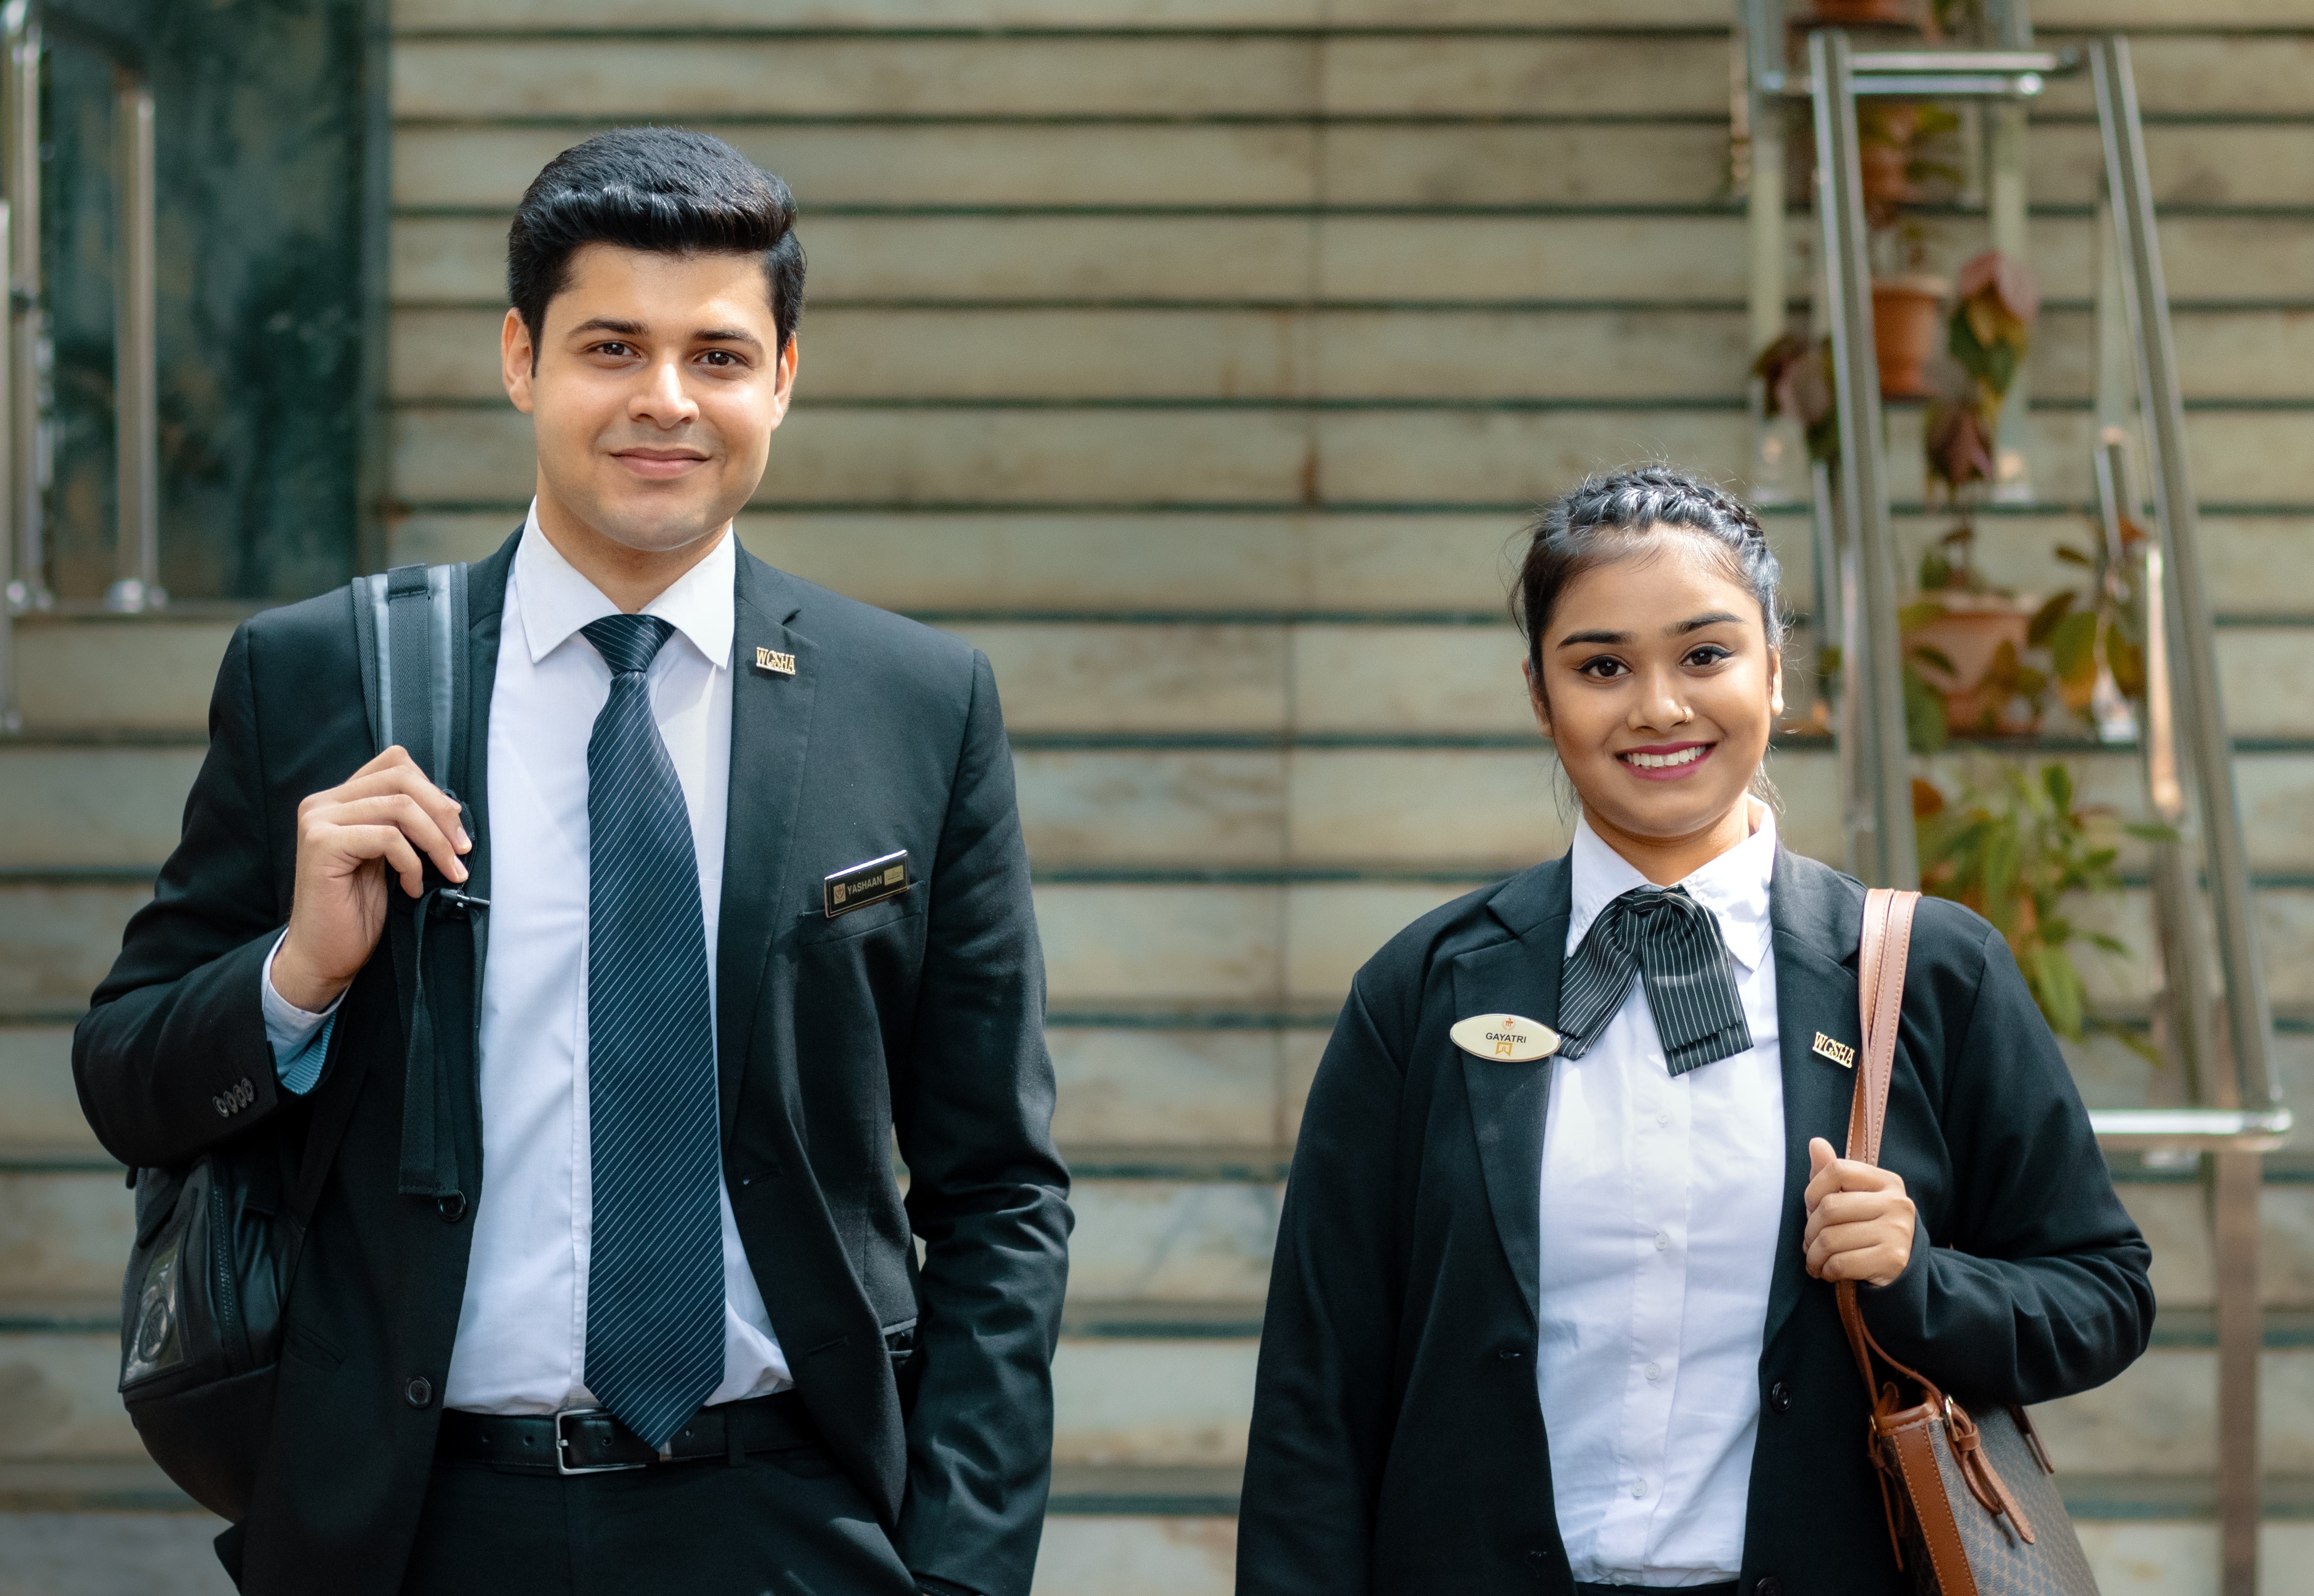 Welcomgroup Graduate School of Hotel Administration becomes the first hospitality school in Asia-Pacific region to receive the Hotel Schools of Distinction